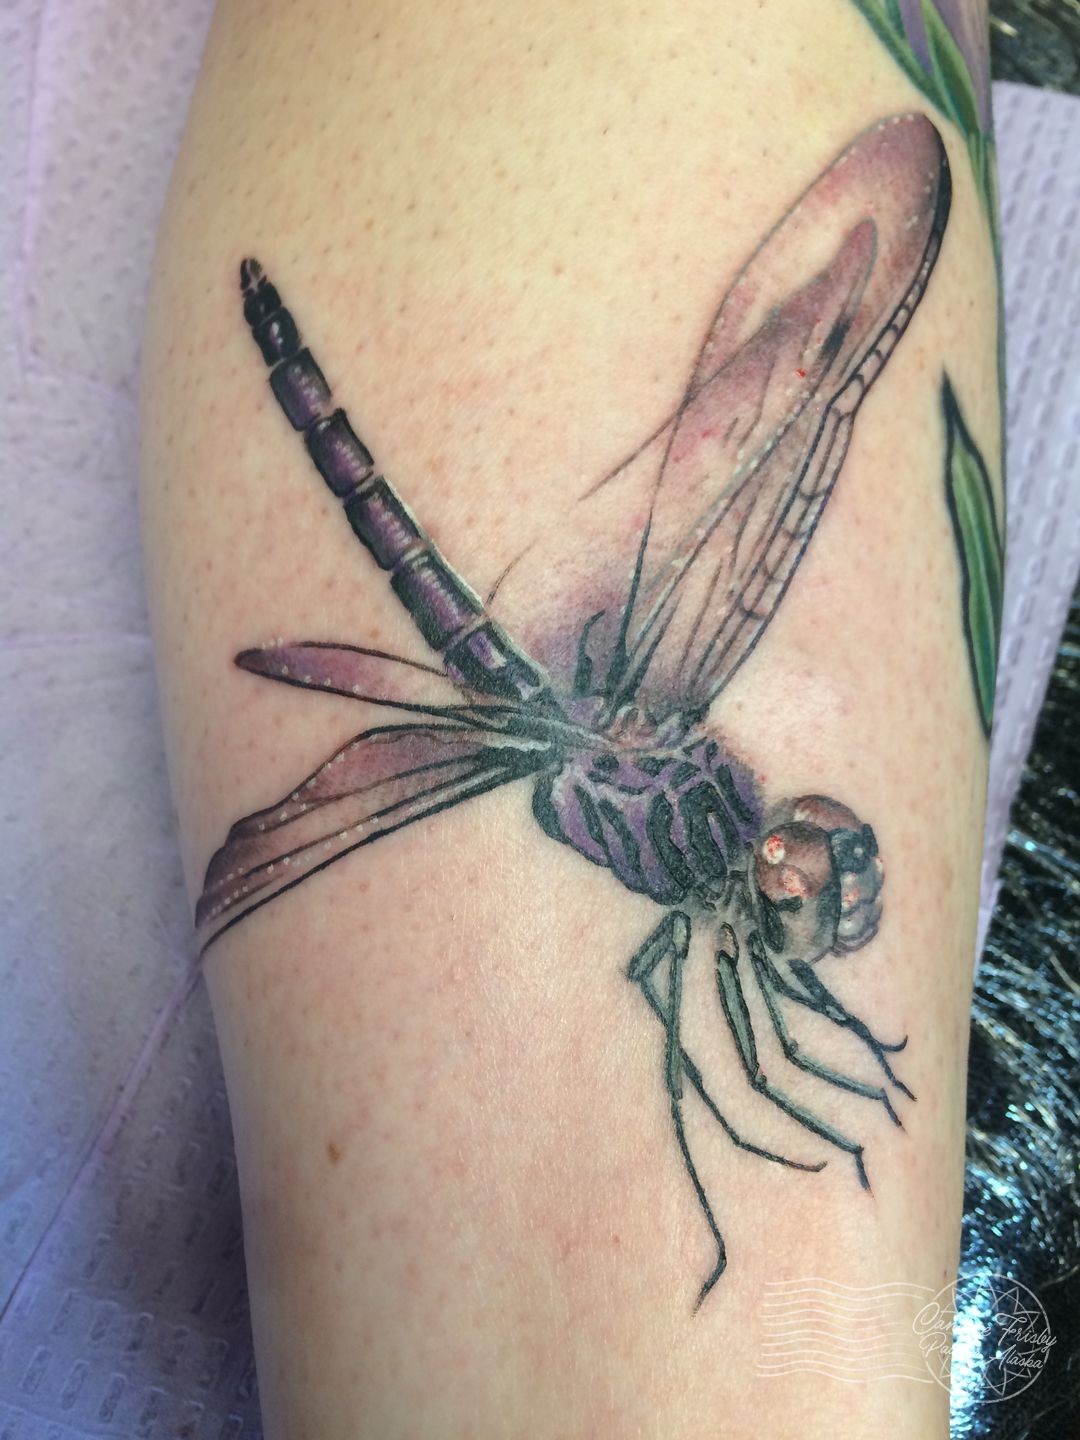 Dragonfly tattoo Stock Photos, Royalty Free Dragonfly tattoo Images |  Depositphotos